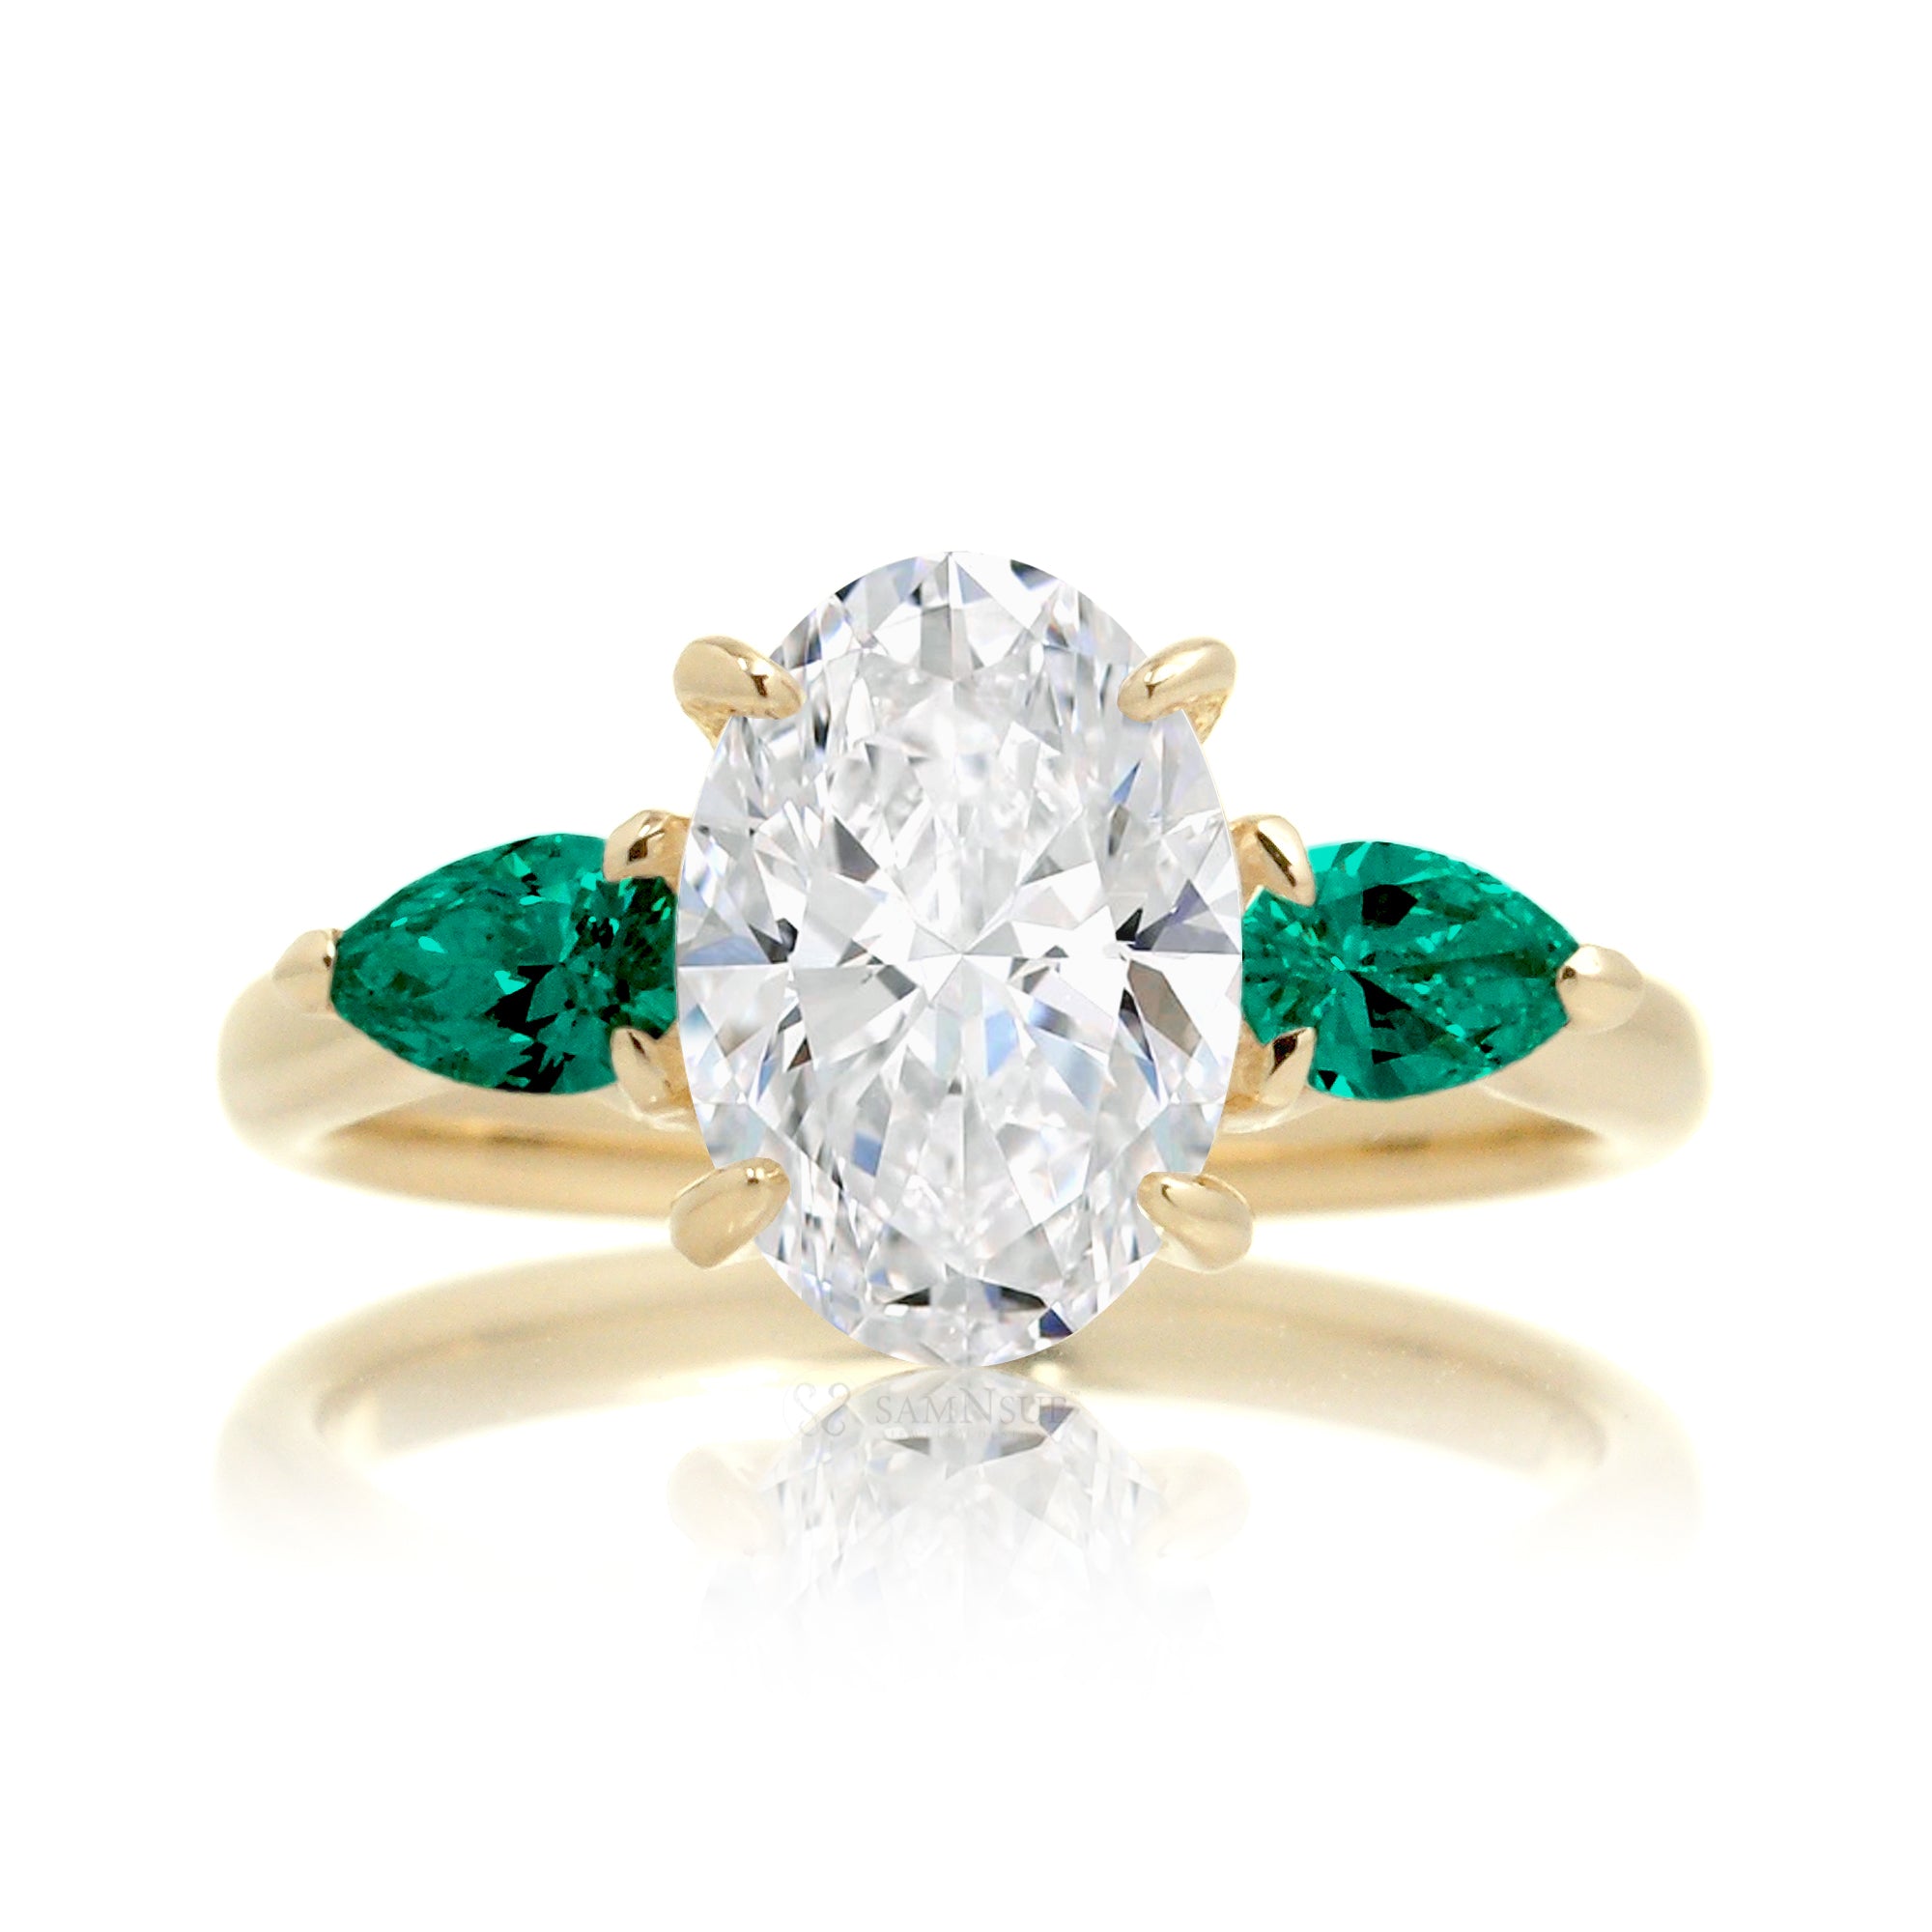 Three-stone pear emerald and oval cut diamond engagement ring yellow gold